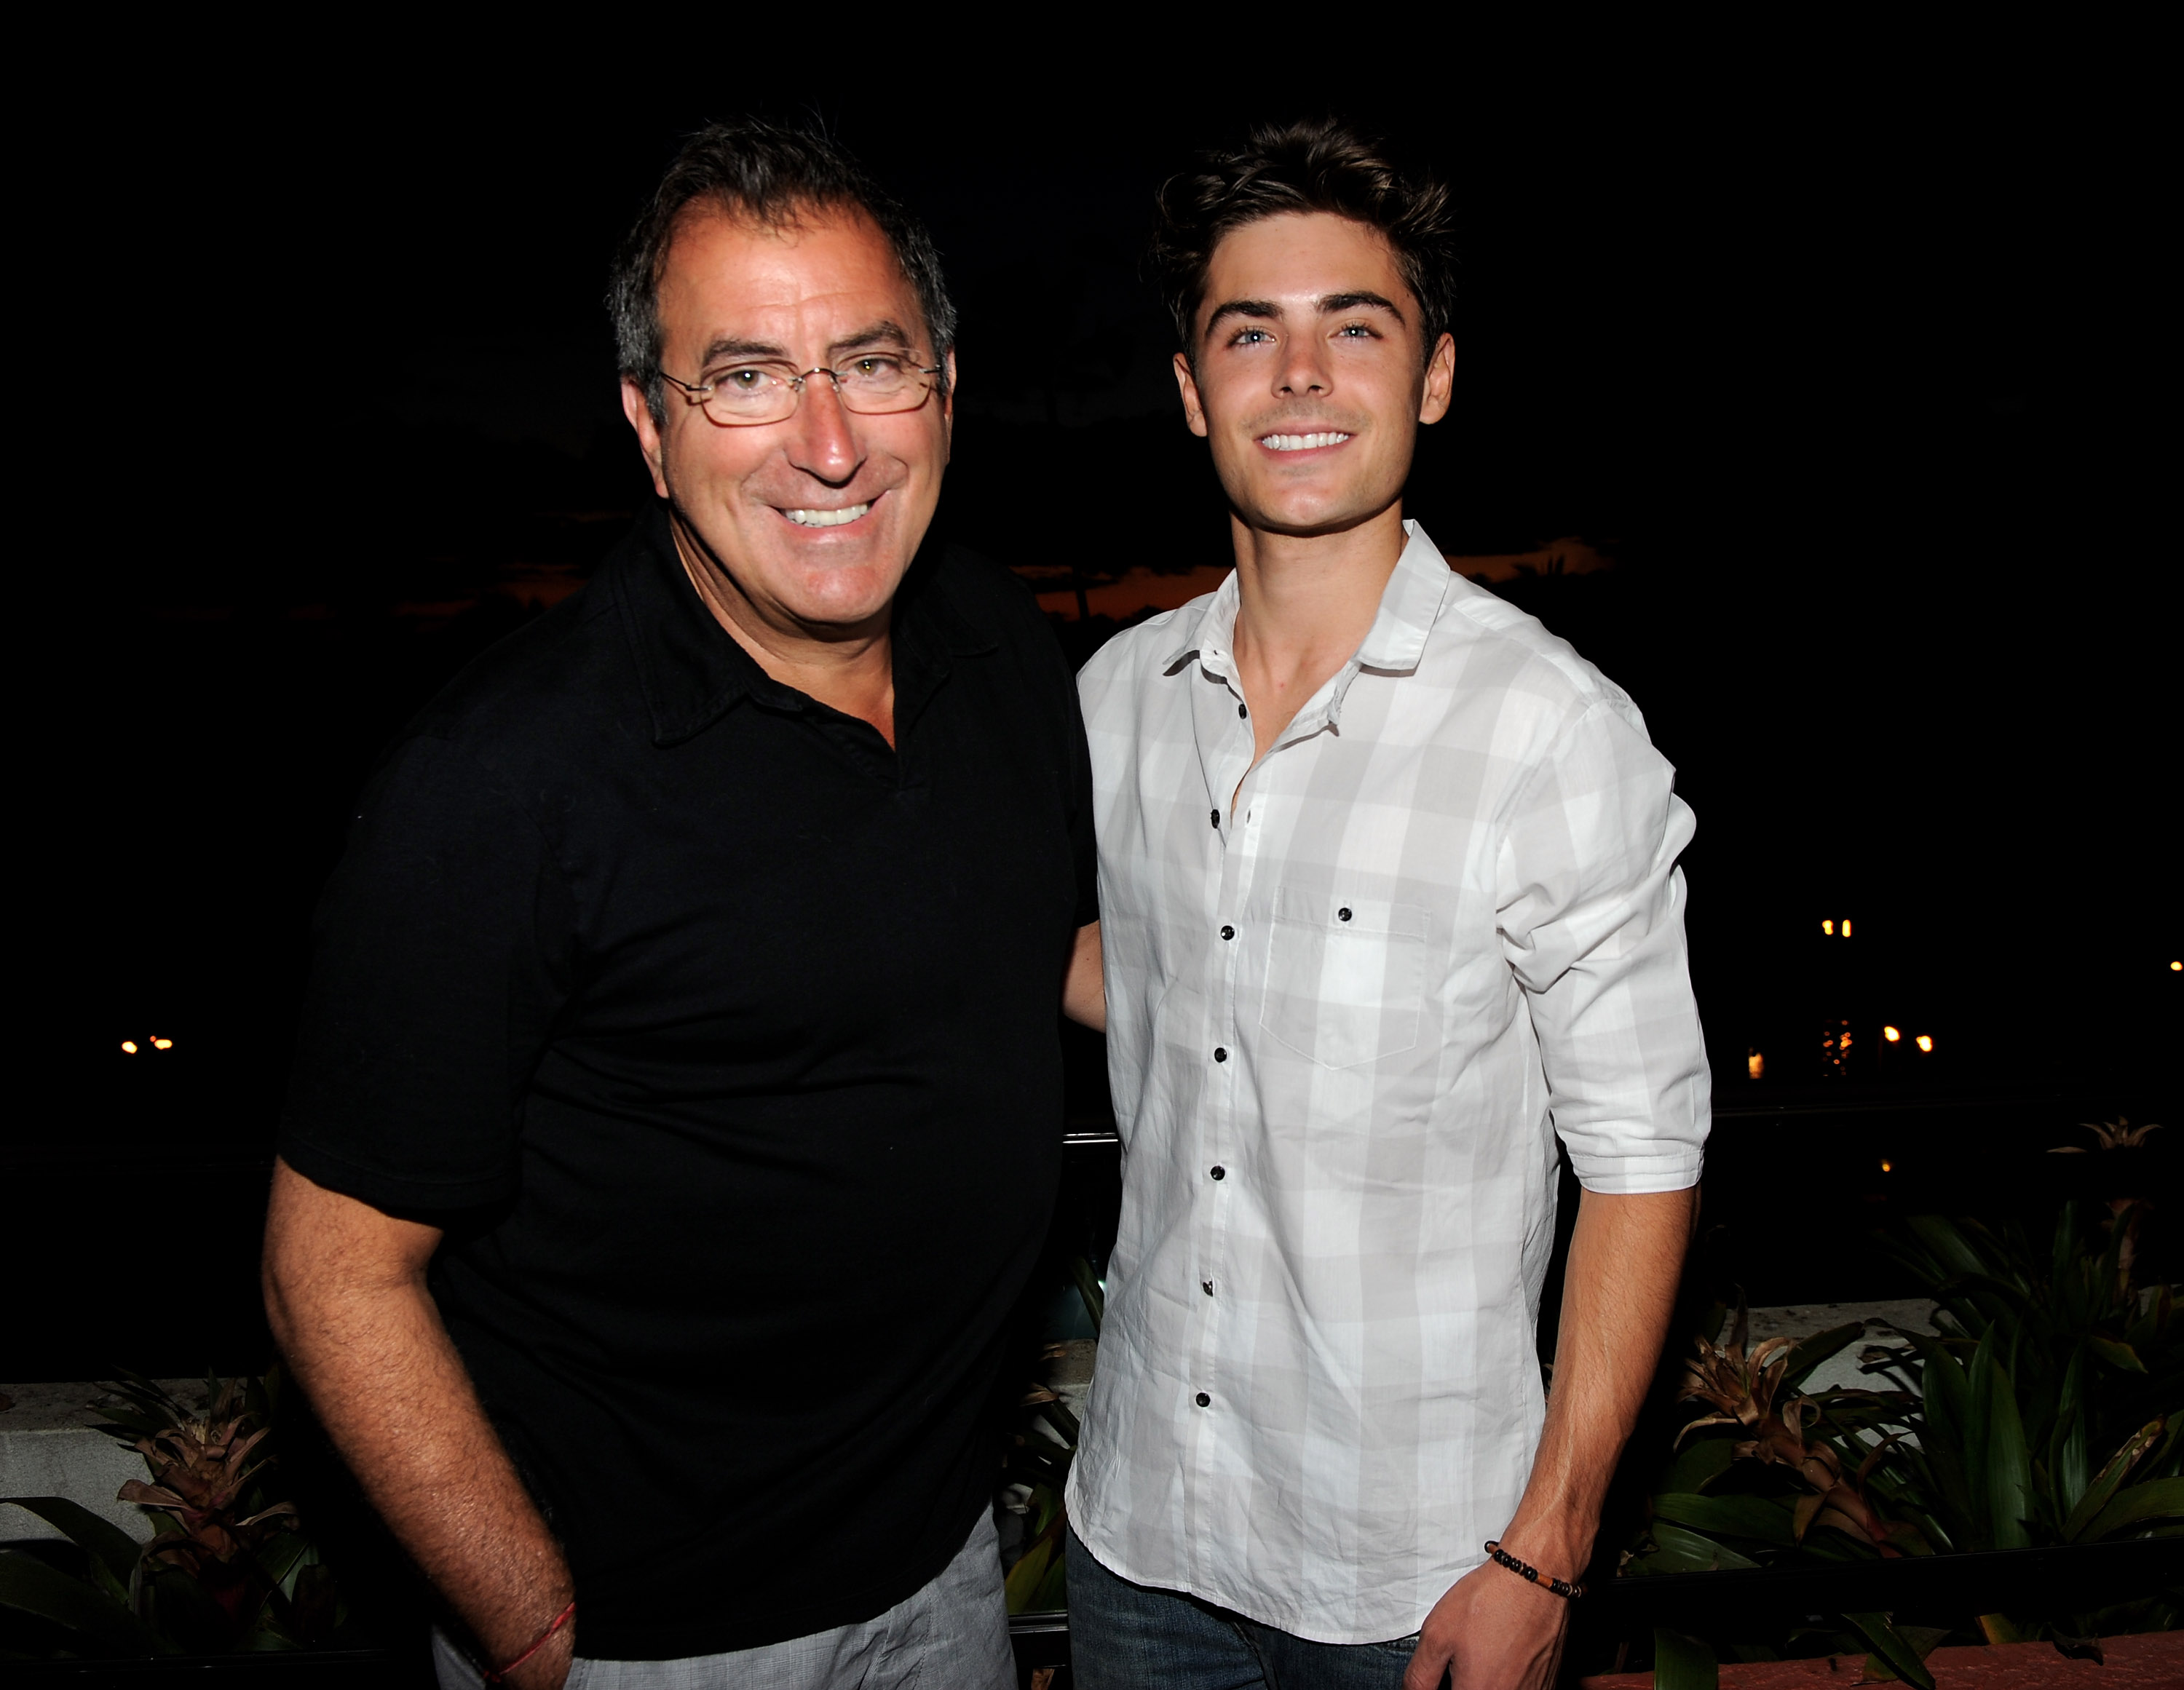 Kenny Ortega (L) and Zac Efron attend the 2010 Maui Film Festival VIP Party on June 17, 2010 in Wailea, Hawaii. 